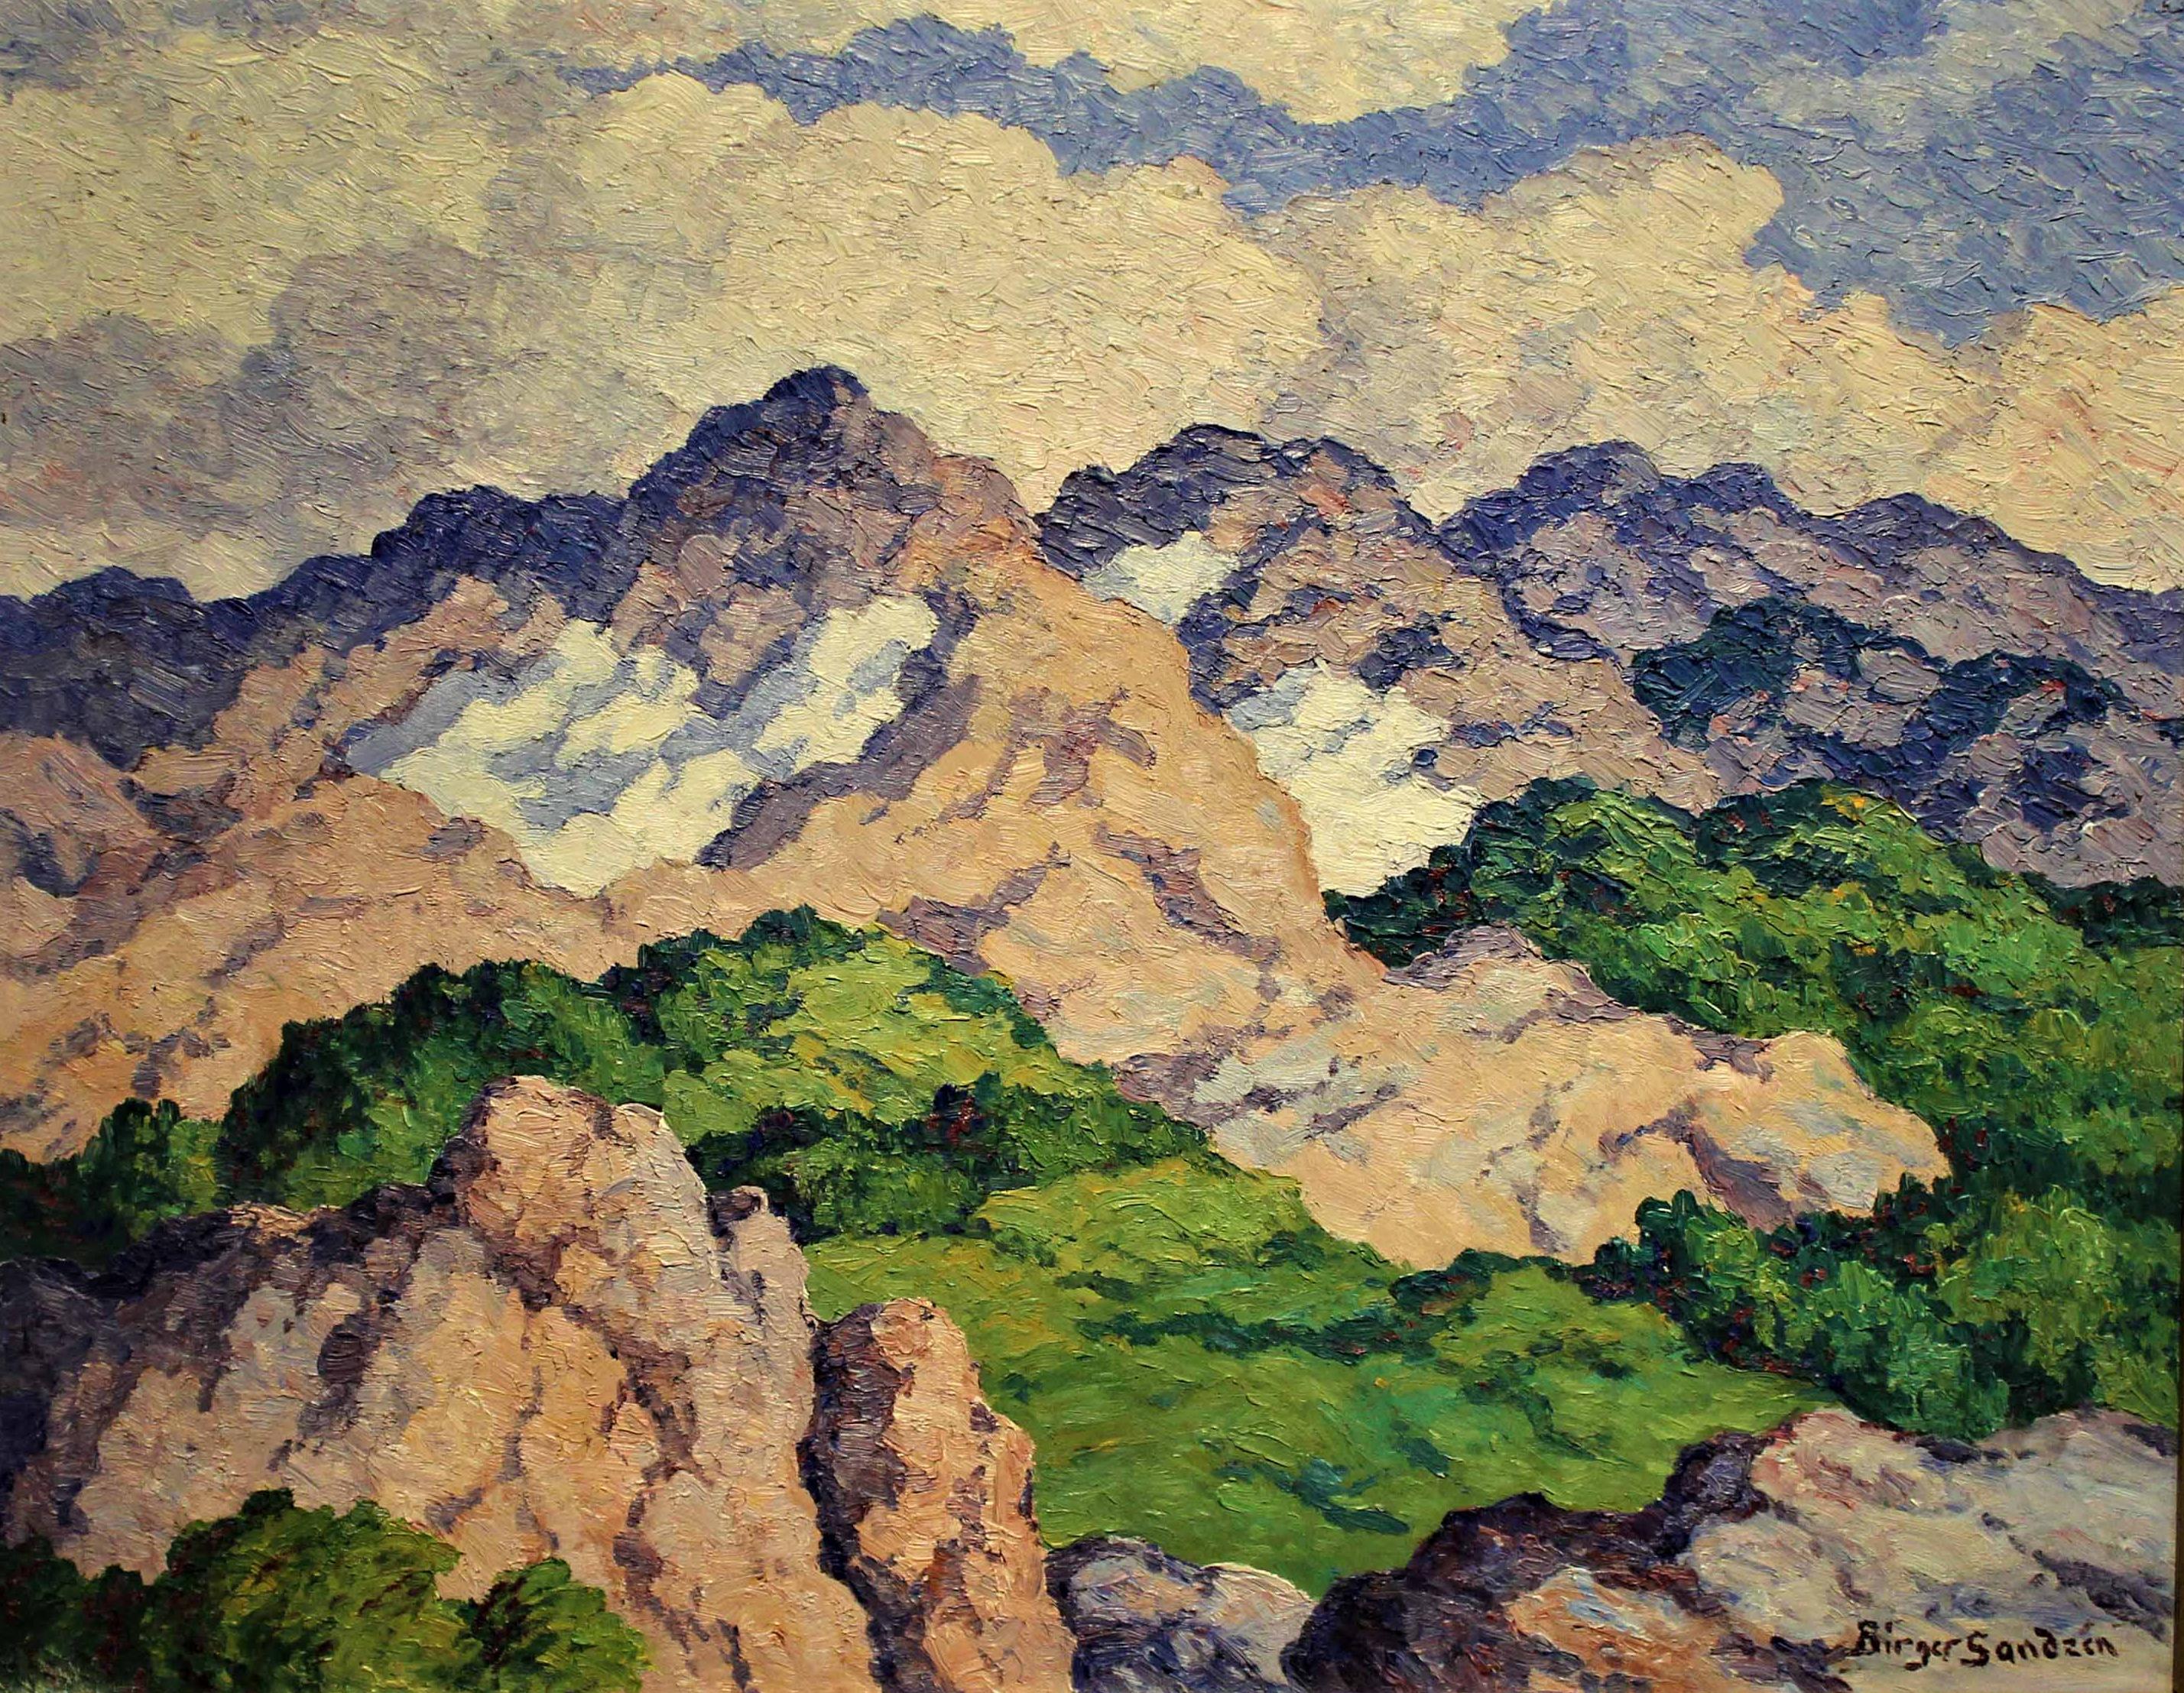 Painting by birger sandzen called "in the mountains"